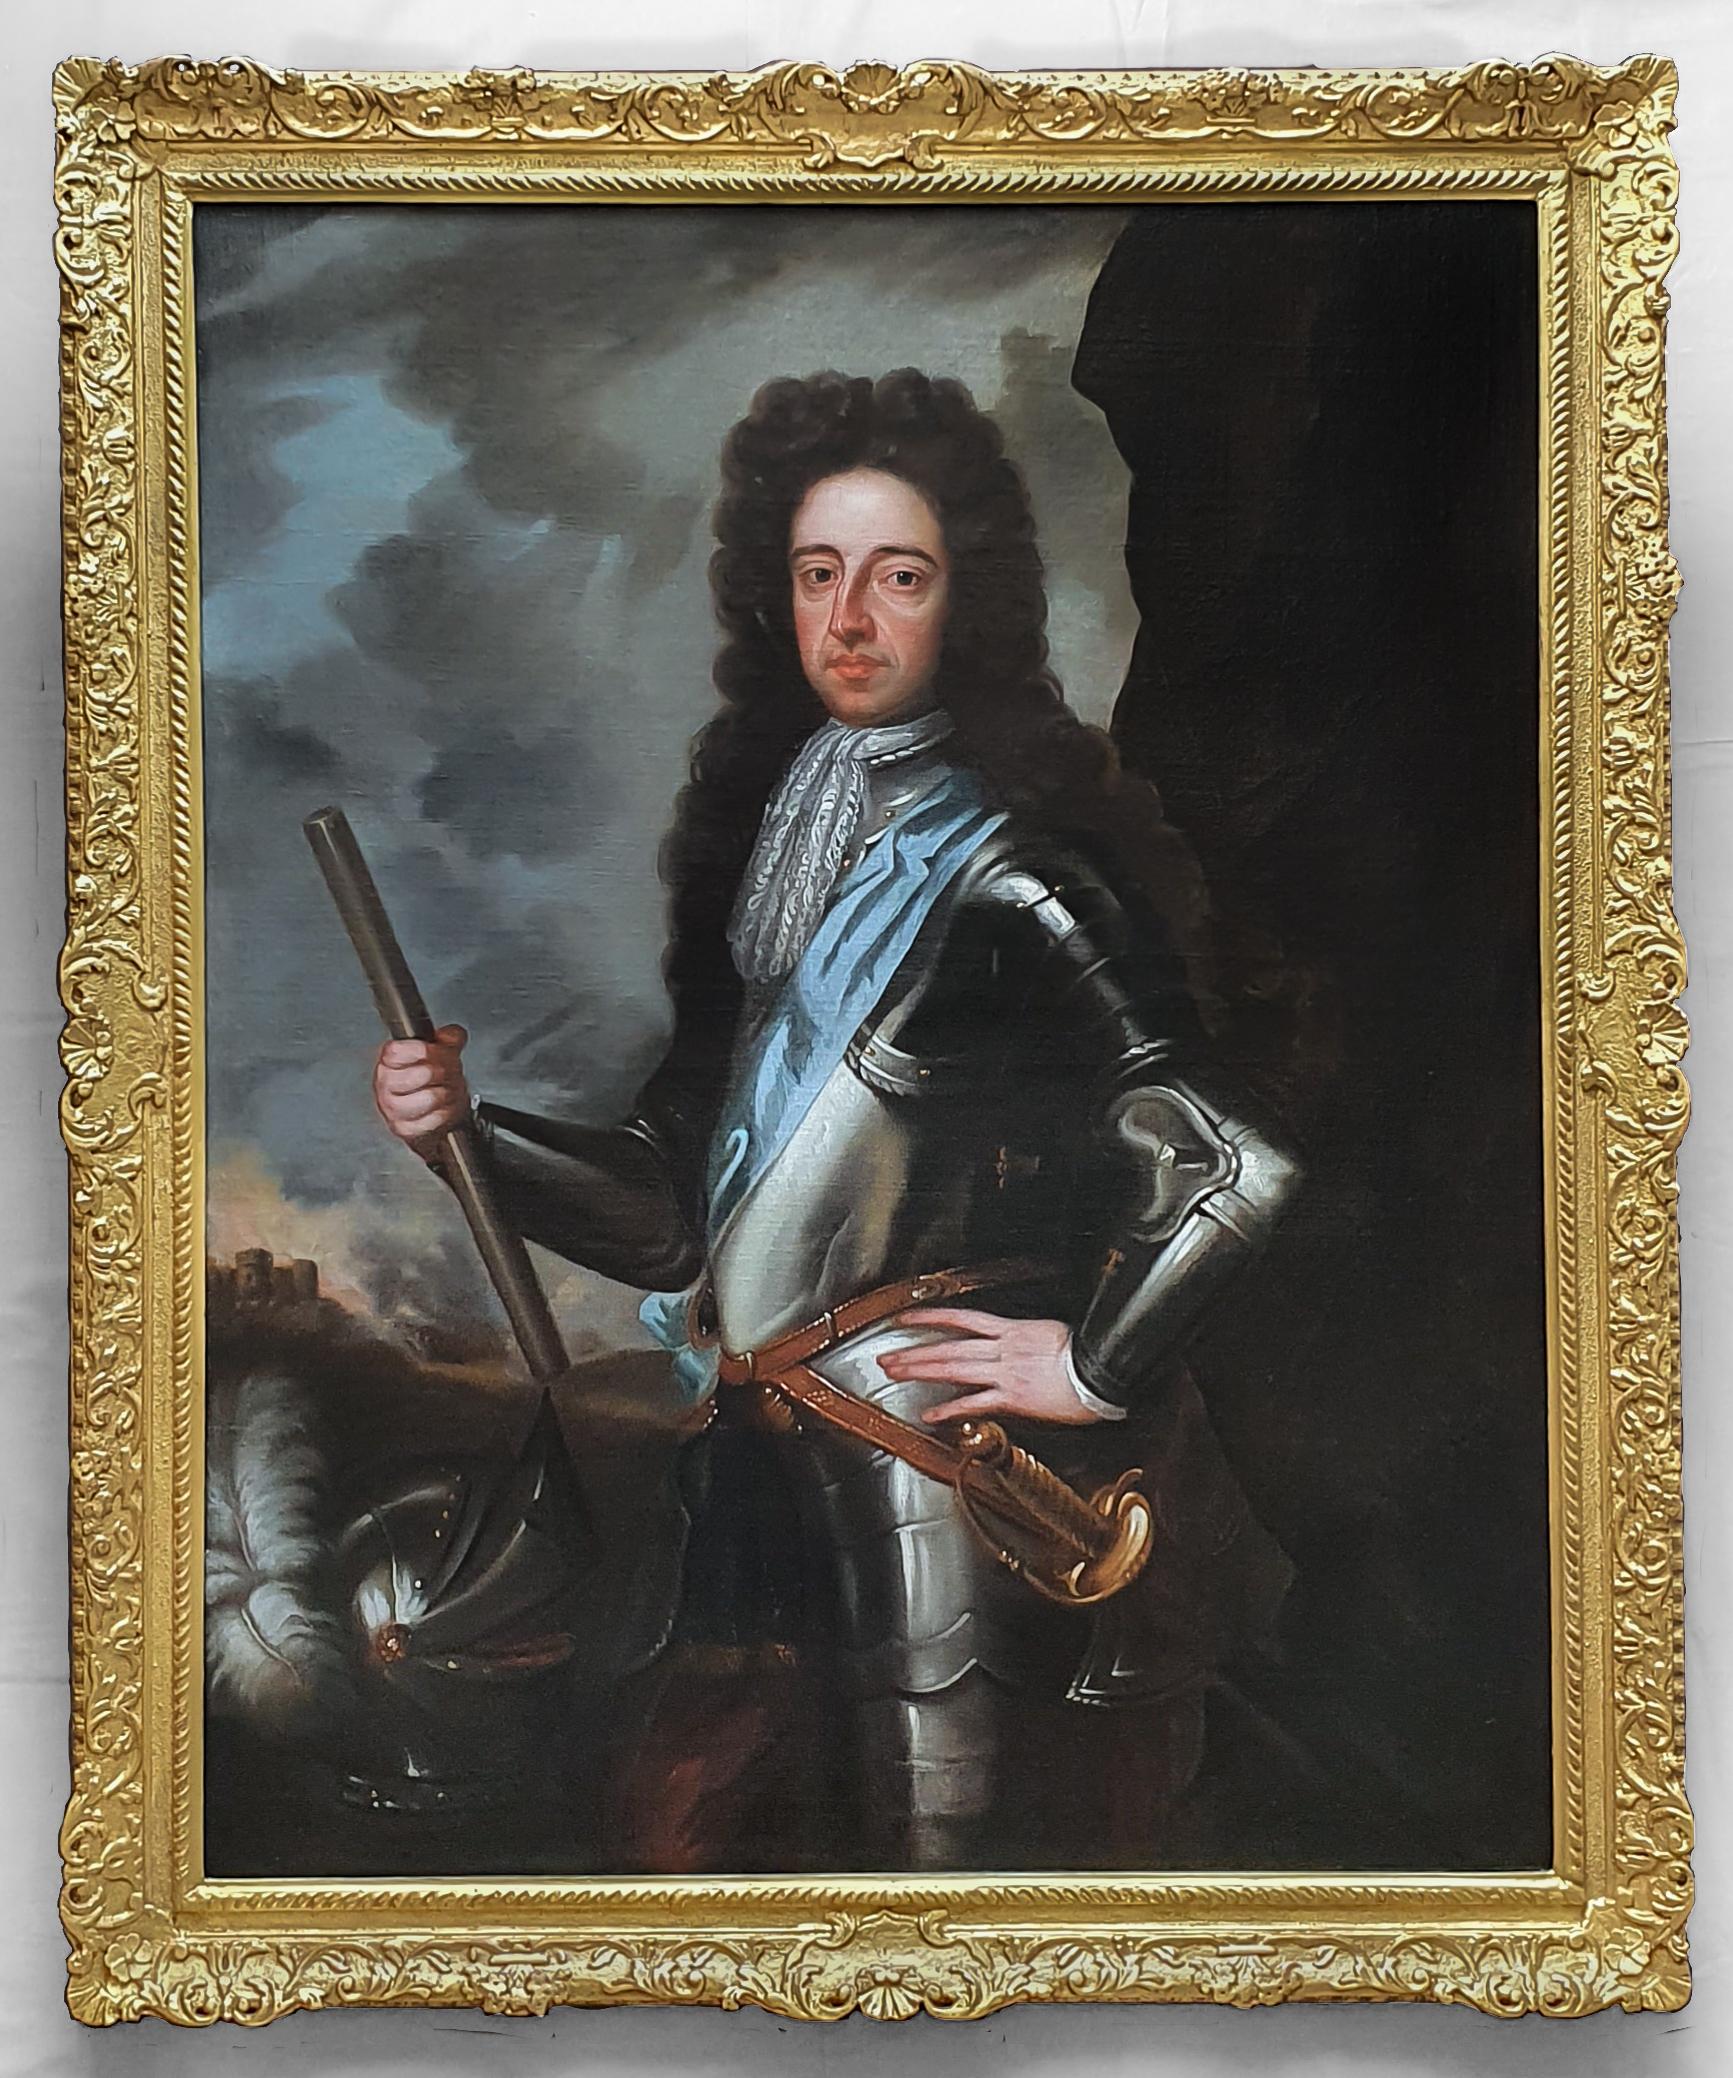 Sir Godfrey Kneller (Studio of) Portrait Painting - Portrait of King William III circa 1700, Antique Oil on Canvas Painting